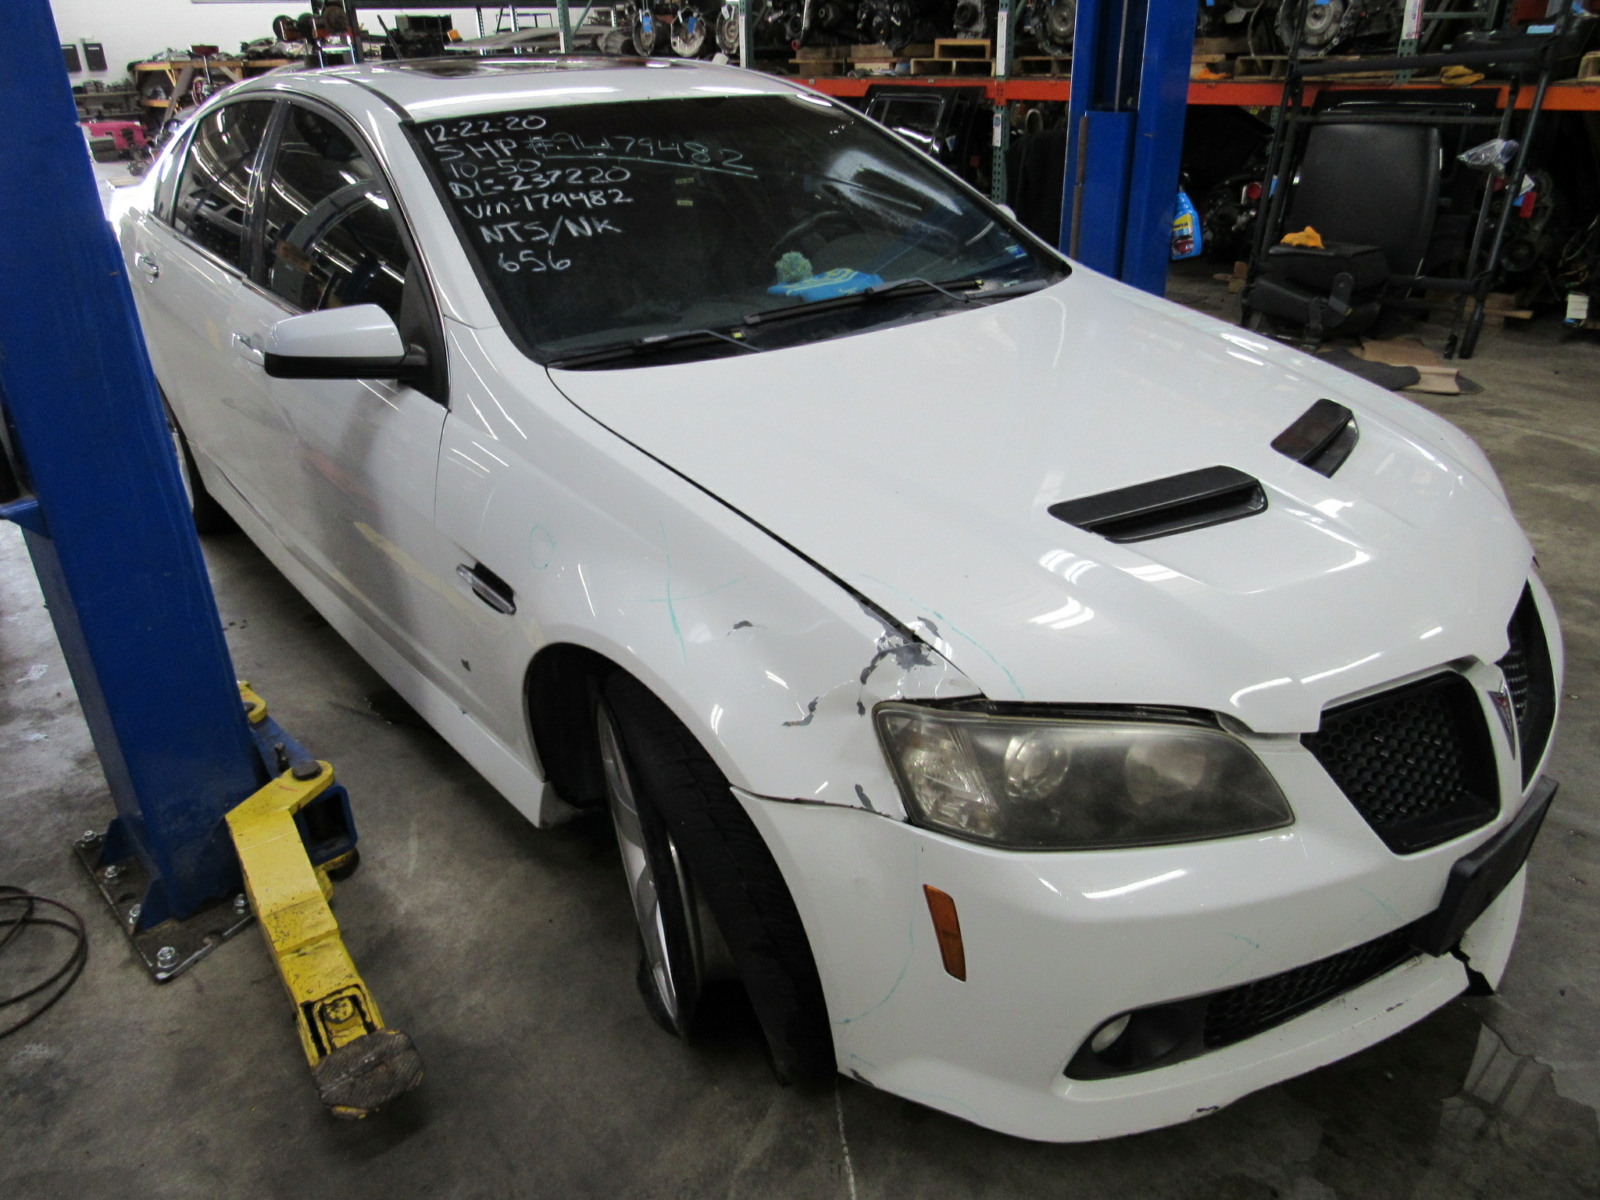 09 Pontiac G8 GT 6.0L 6L80 in for parts  5-11-23